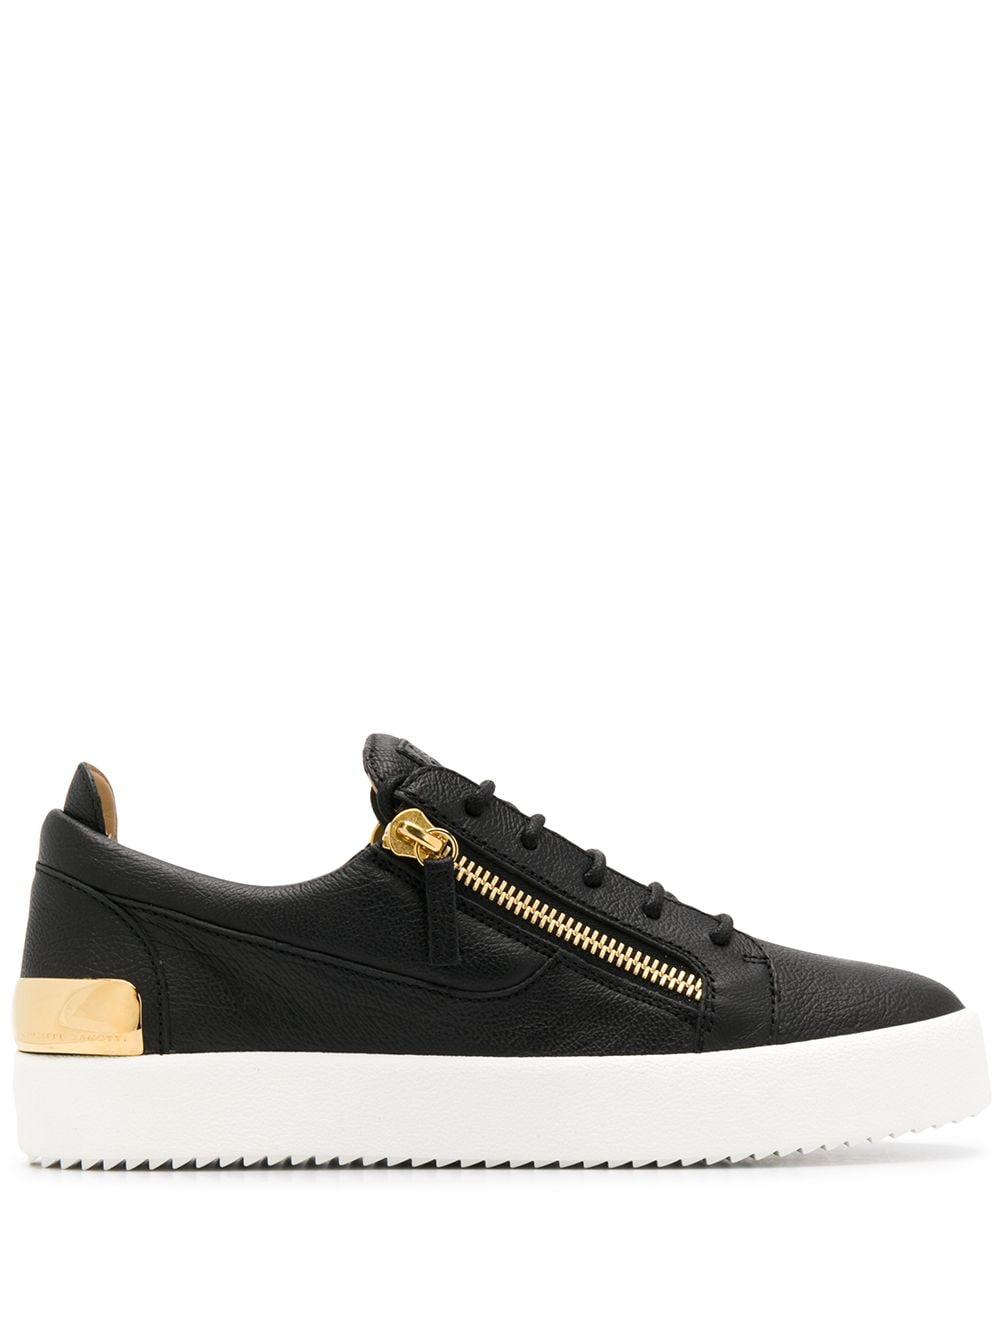 Giuseppe Zanotti Leather Low-top Sneakers in Black for Men - Save 20% ...